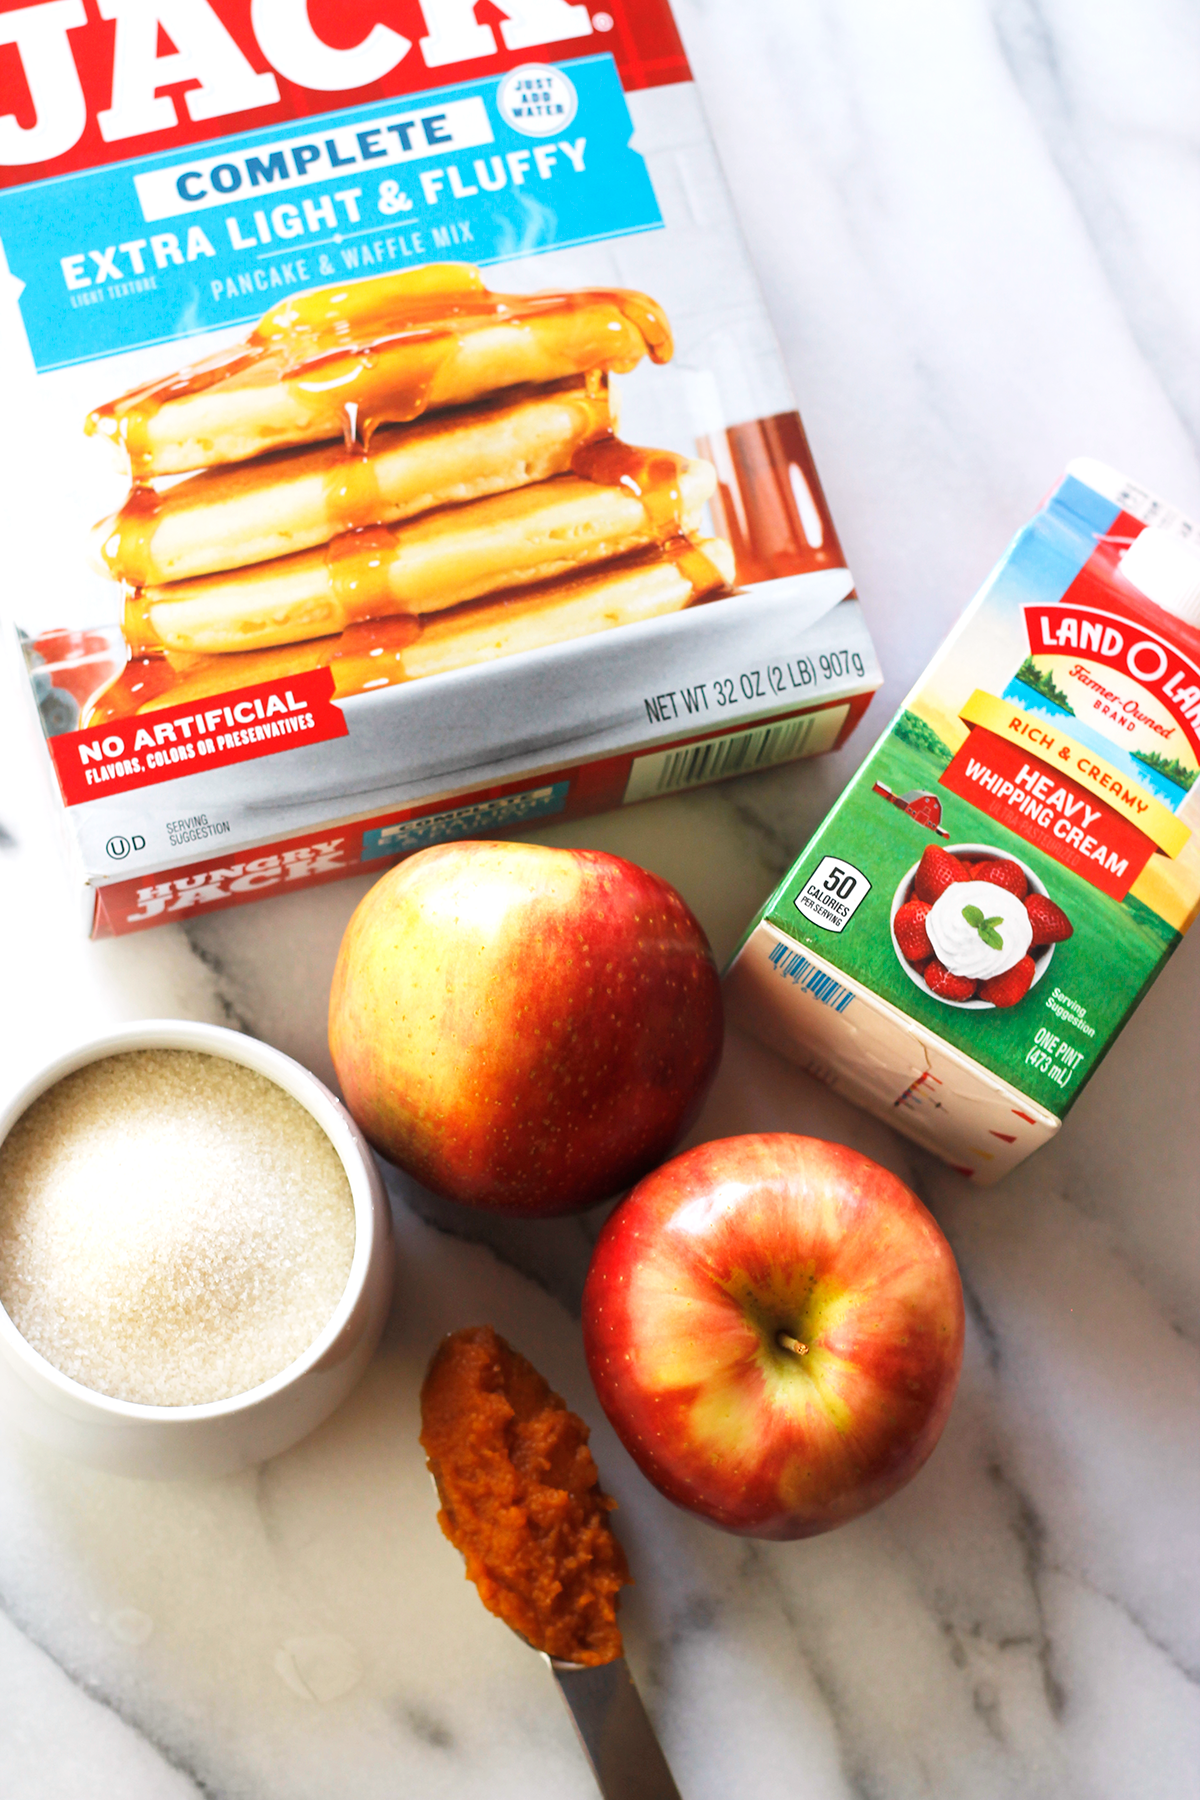 Overhead shot of the ingredients needed to make pumpkin pancakes with apples and pumpkin caramel sauce. Clockwise from the top, a box of complete pancake mix, carton of heavy whipping cream, two apples, tablespoon filled with pumpkin puree, and a bowl of sugar.